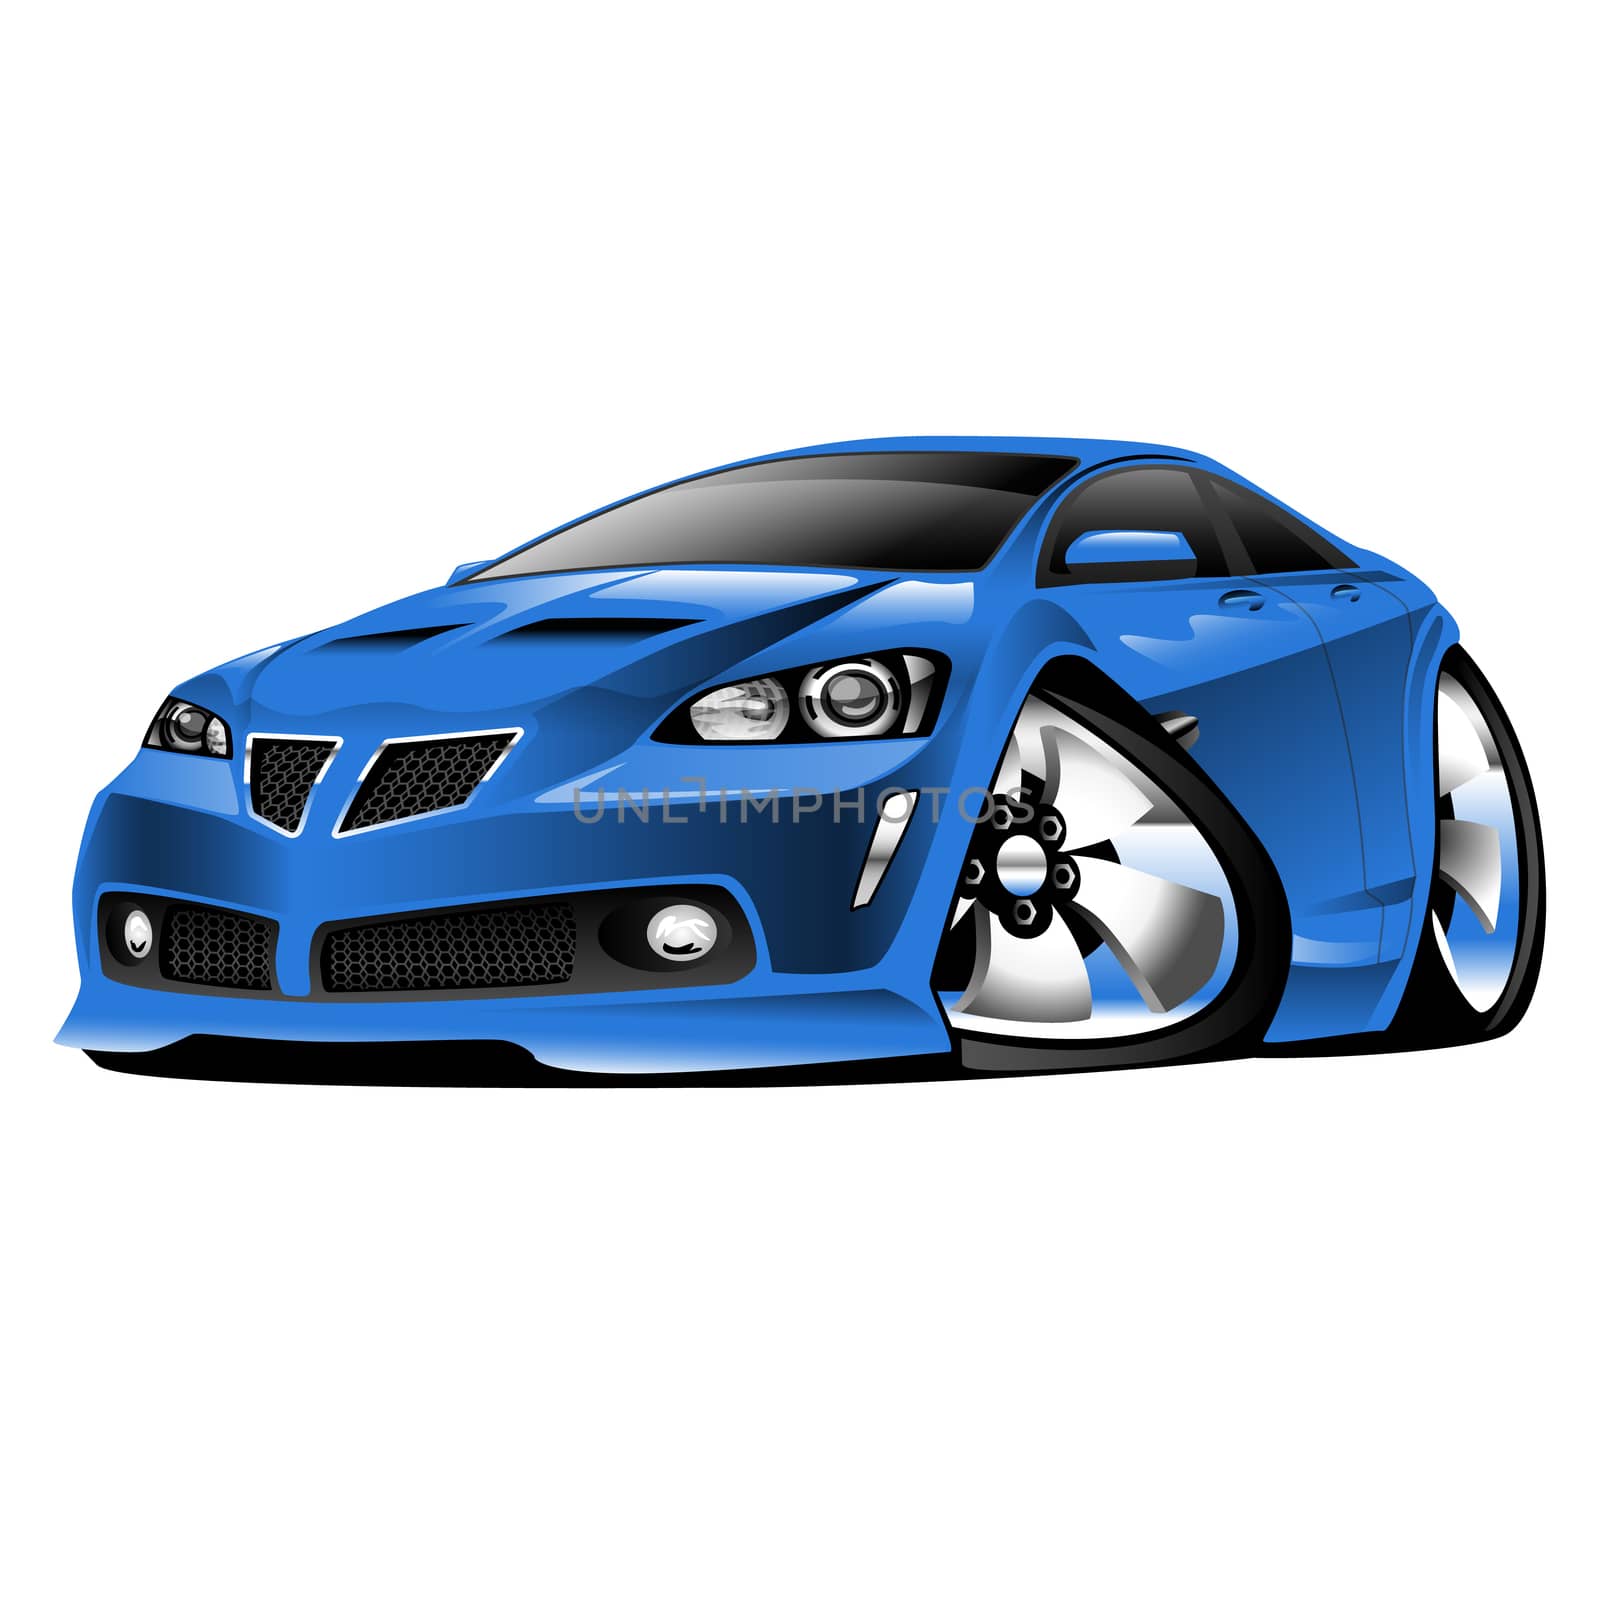 Hot American muscle car cartoon. Blue, lots of chrome, aggressive stance, low profile, big tires and rims.